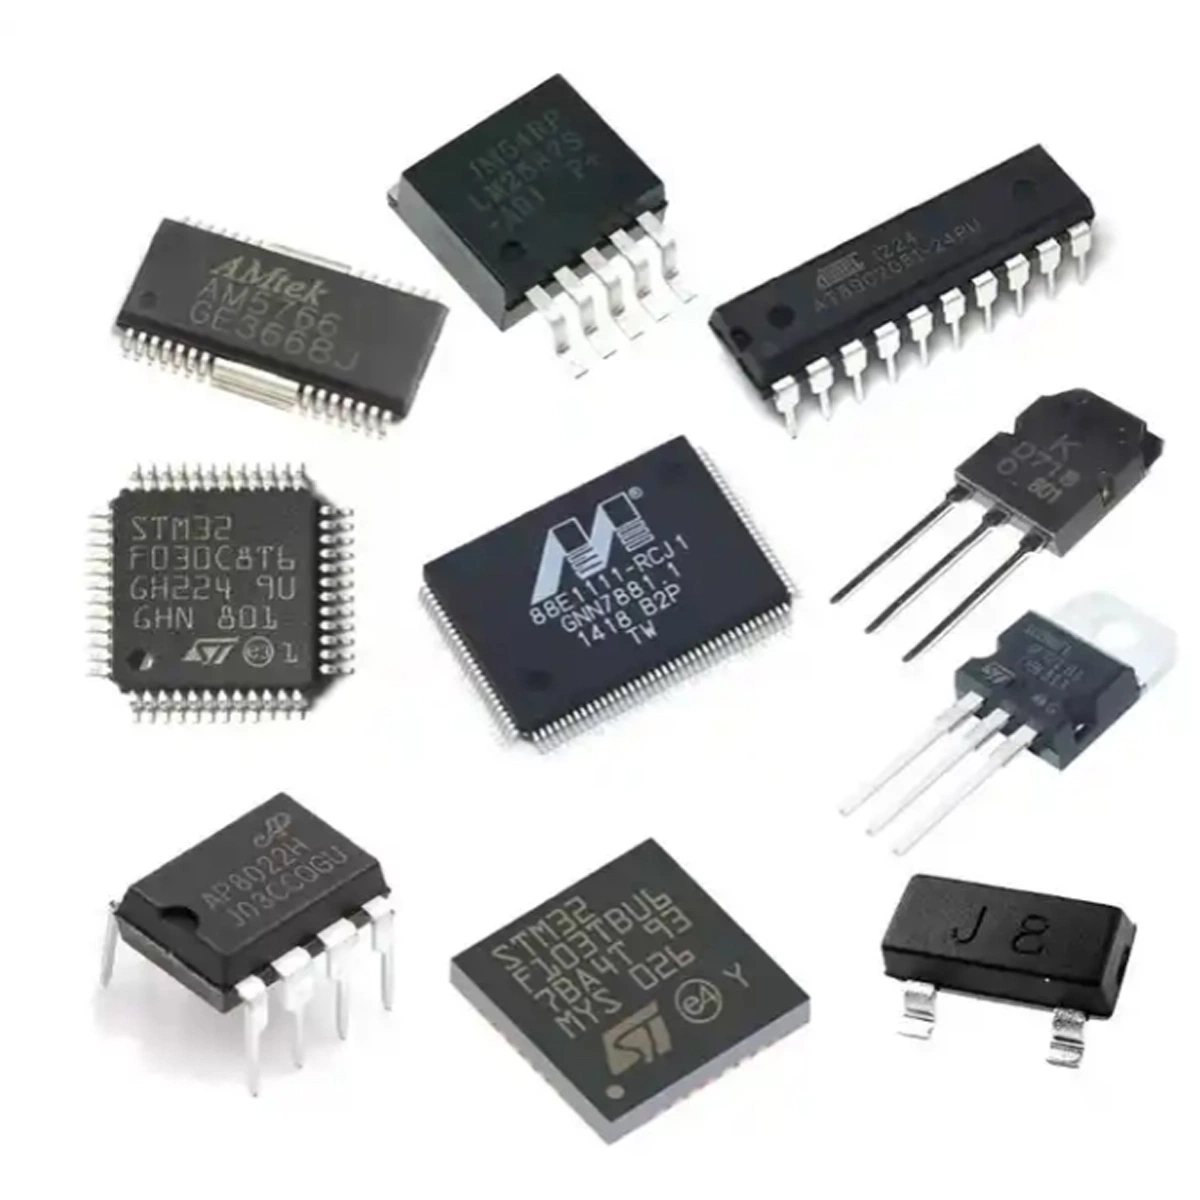 Pmd1000 Integrated Circuits New and Original Electronic Components Pmd1000 Integrated Circuits New and Original Electronic Components